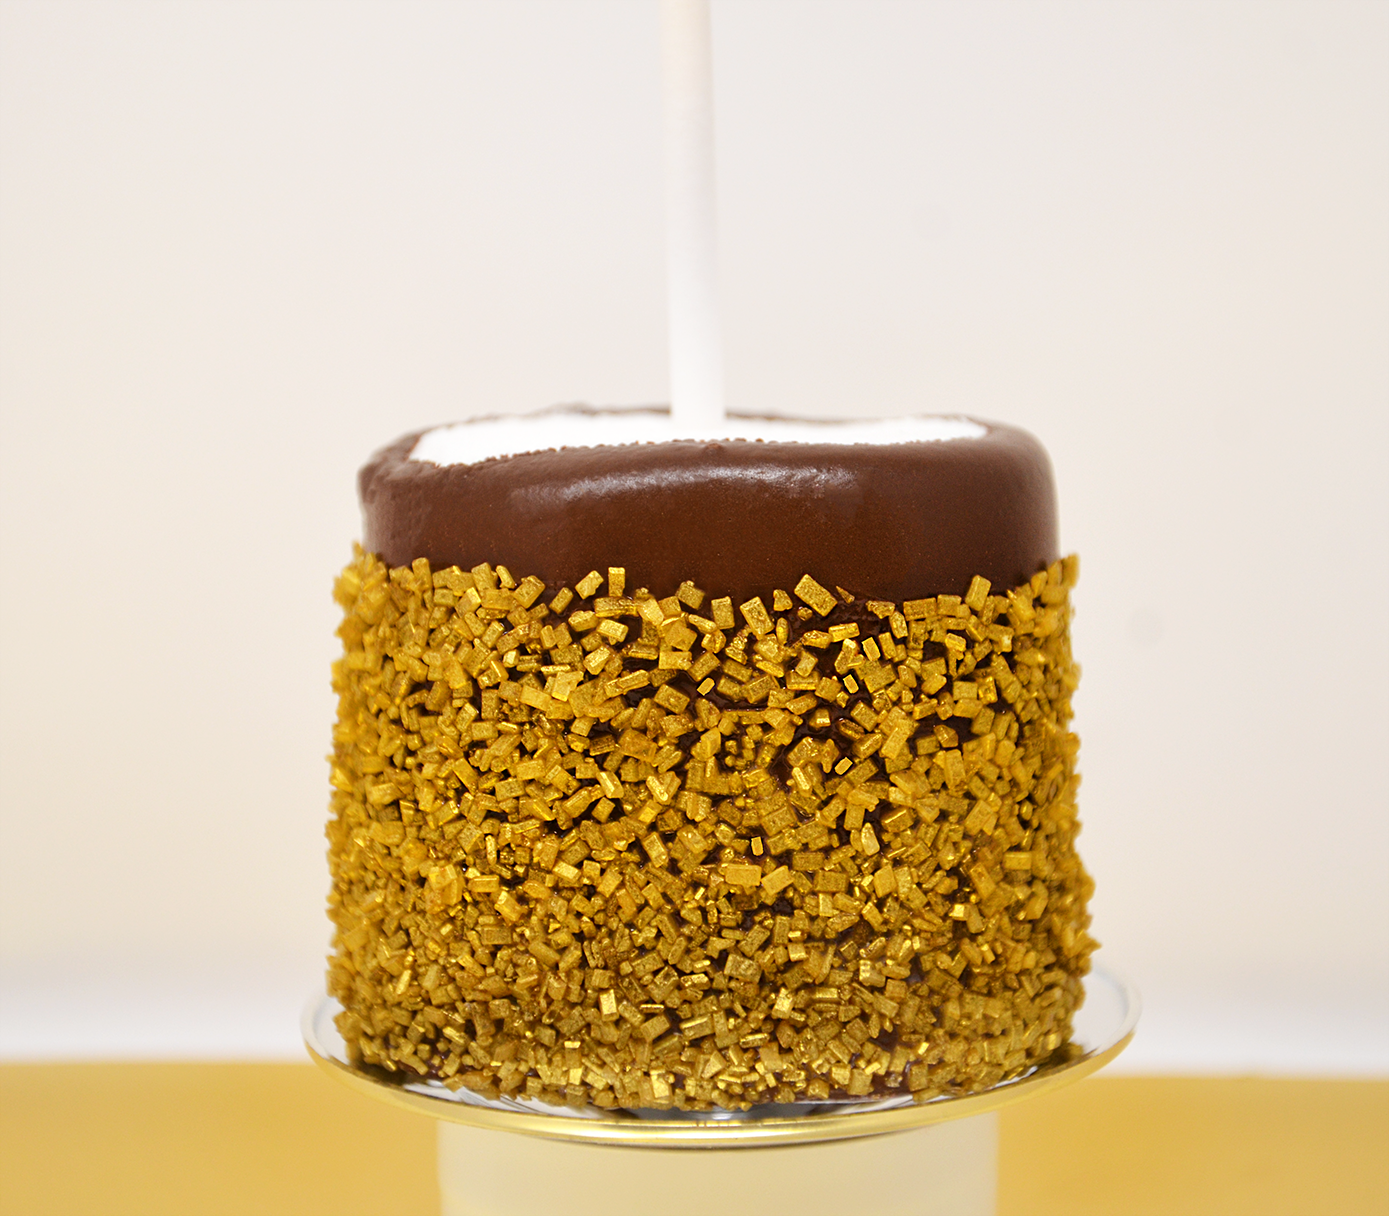 Load image into Gallery viewer, Dreaming of a White Christmas in Gold Sprinkle Decorating Kit 7 oz.
